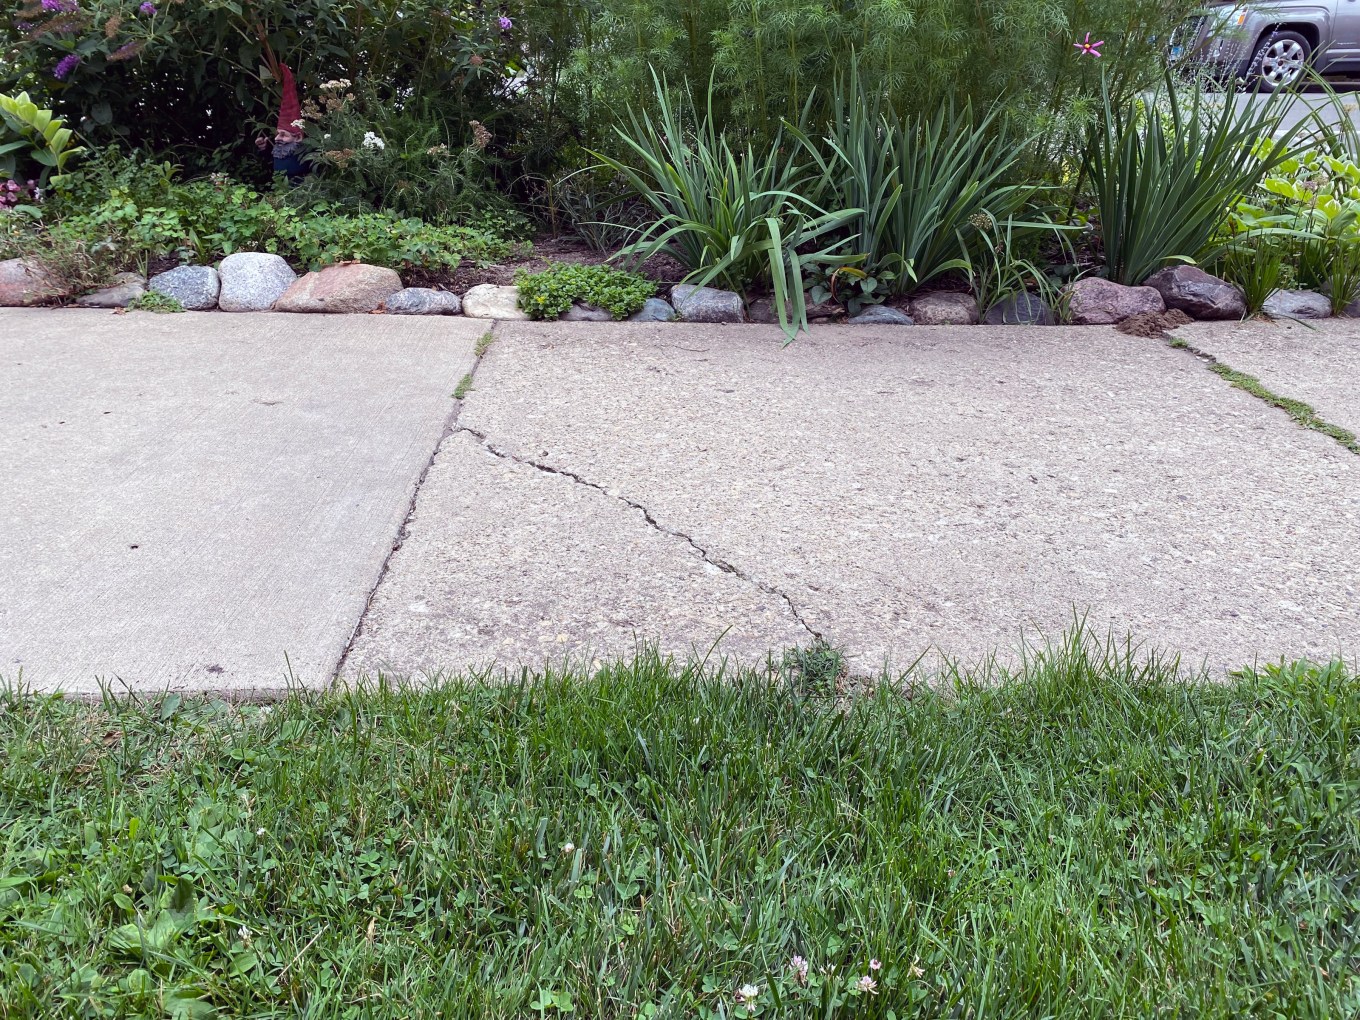 Repair cracks in your driveways and sidewalks before winter hits to prevent them from spreading.